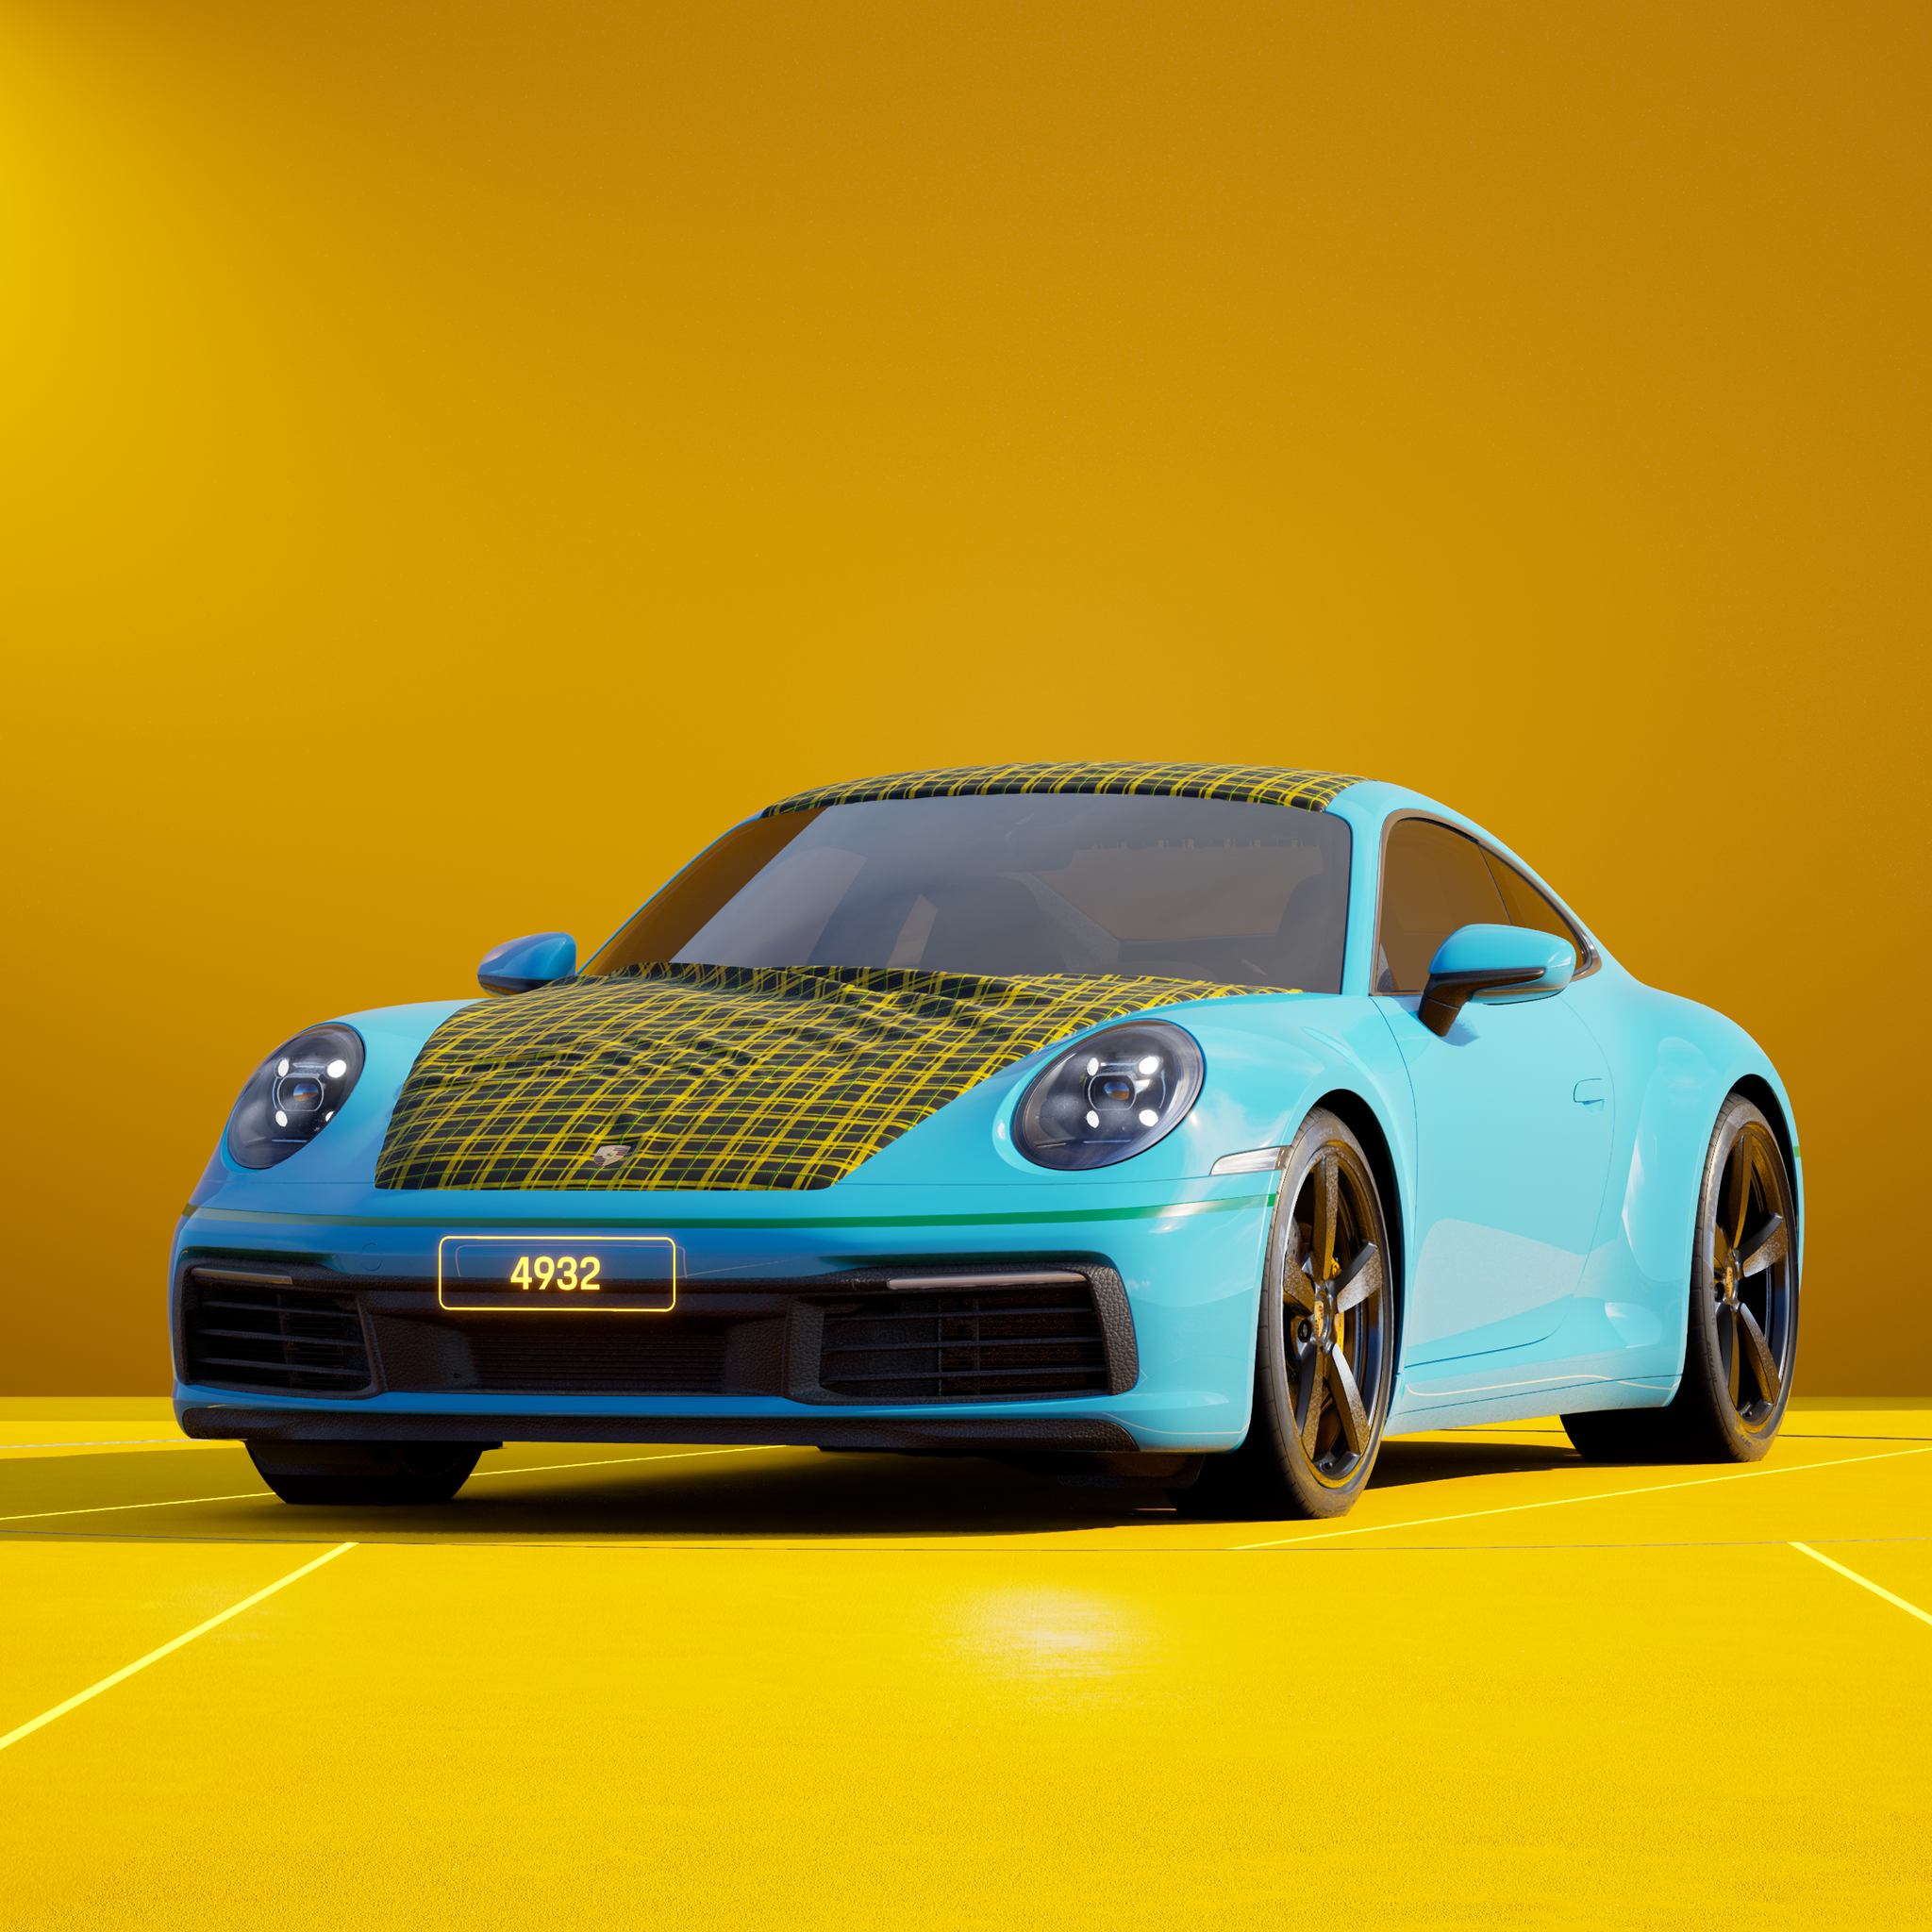 The PORSCHΞ 911 4932 image in phase